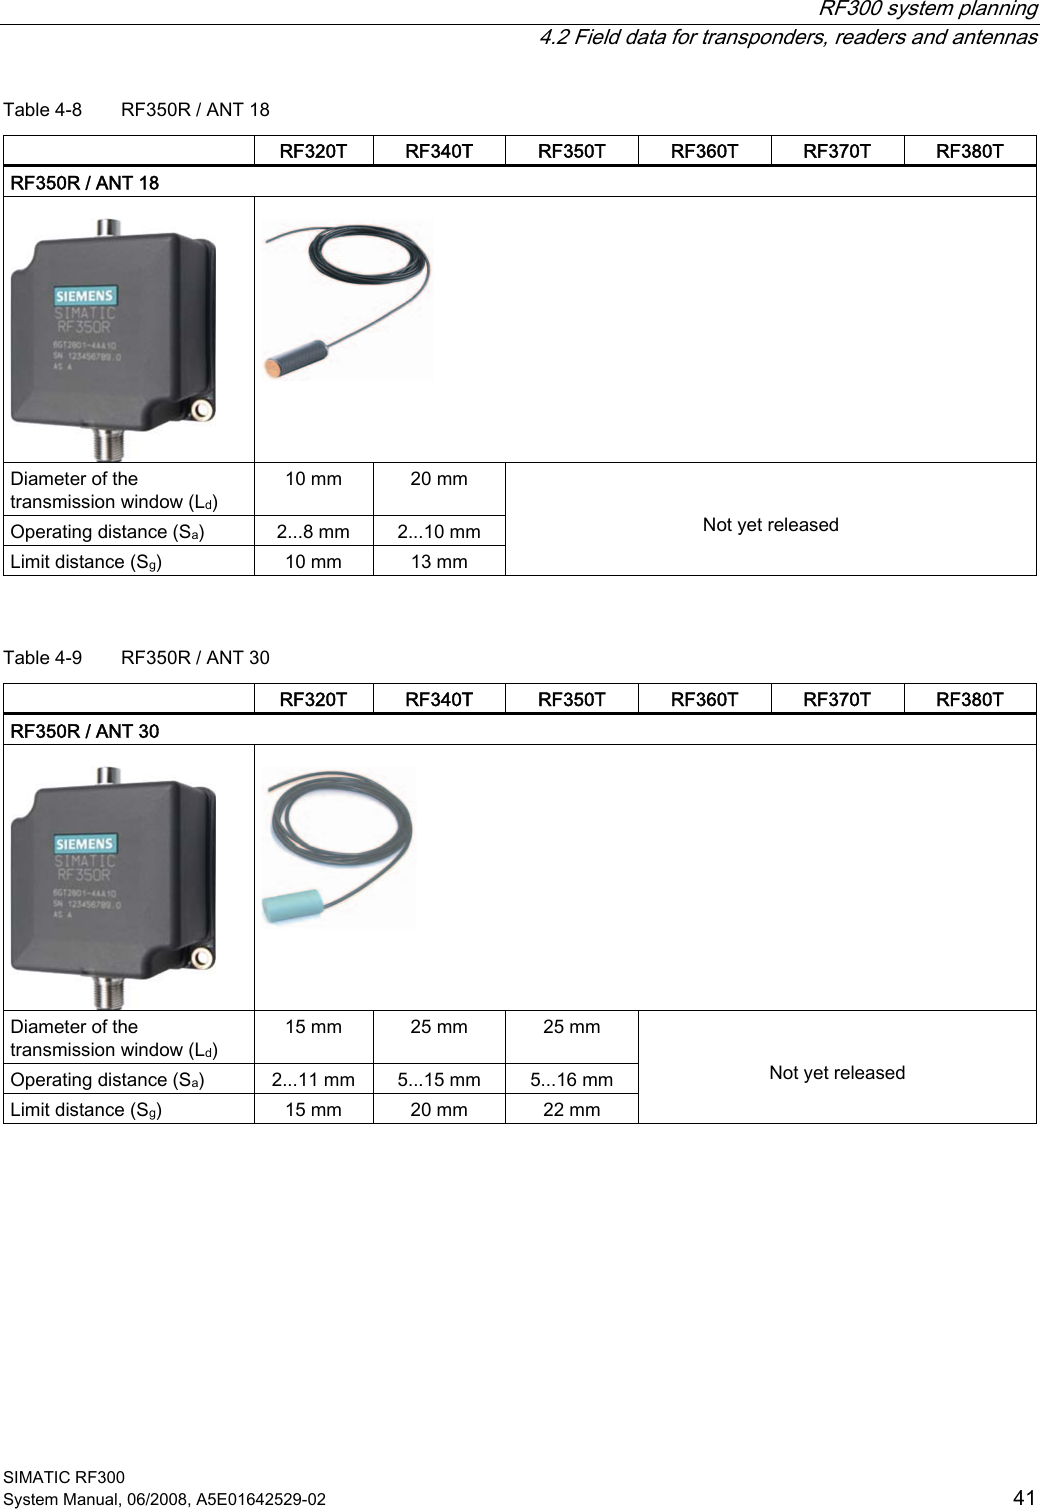  RF300 system planning   4.2 Field data for transponders, readers and antennas SIMATIC RF300 System Manual, 06/2008, A5E01642529-02  41 Table 4-8  RF350R / ANT 18   RF320T  RF340T  RF350T  RF360T  RF370T  RF380T RF350R / ANT 18     Diameter of the transmission window (Ld) 10 mm  20 mm Operating distance (Sa)  2...8 mm  2...10 mm Limit distance (Sg)  10 mm  13 mm   Not yet released  Table 4-9  RF350R / ANT 30   RF320T  RF340T  RF350T  RF360T  RF370T  RF380T RF350R / ANT 30     Diameter of the transmission window (Ld) 15 mm  25 mm  25 mm Operating distance (Sa)  2...11 mm  5...15 mm  5...16 mm Limit distance (Sg)  15 mm  20 mm  22 mm   Not yet released  